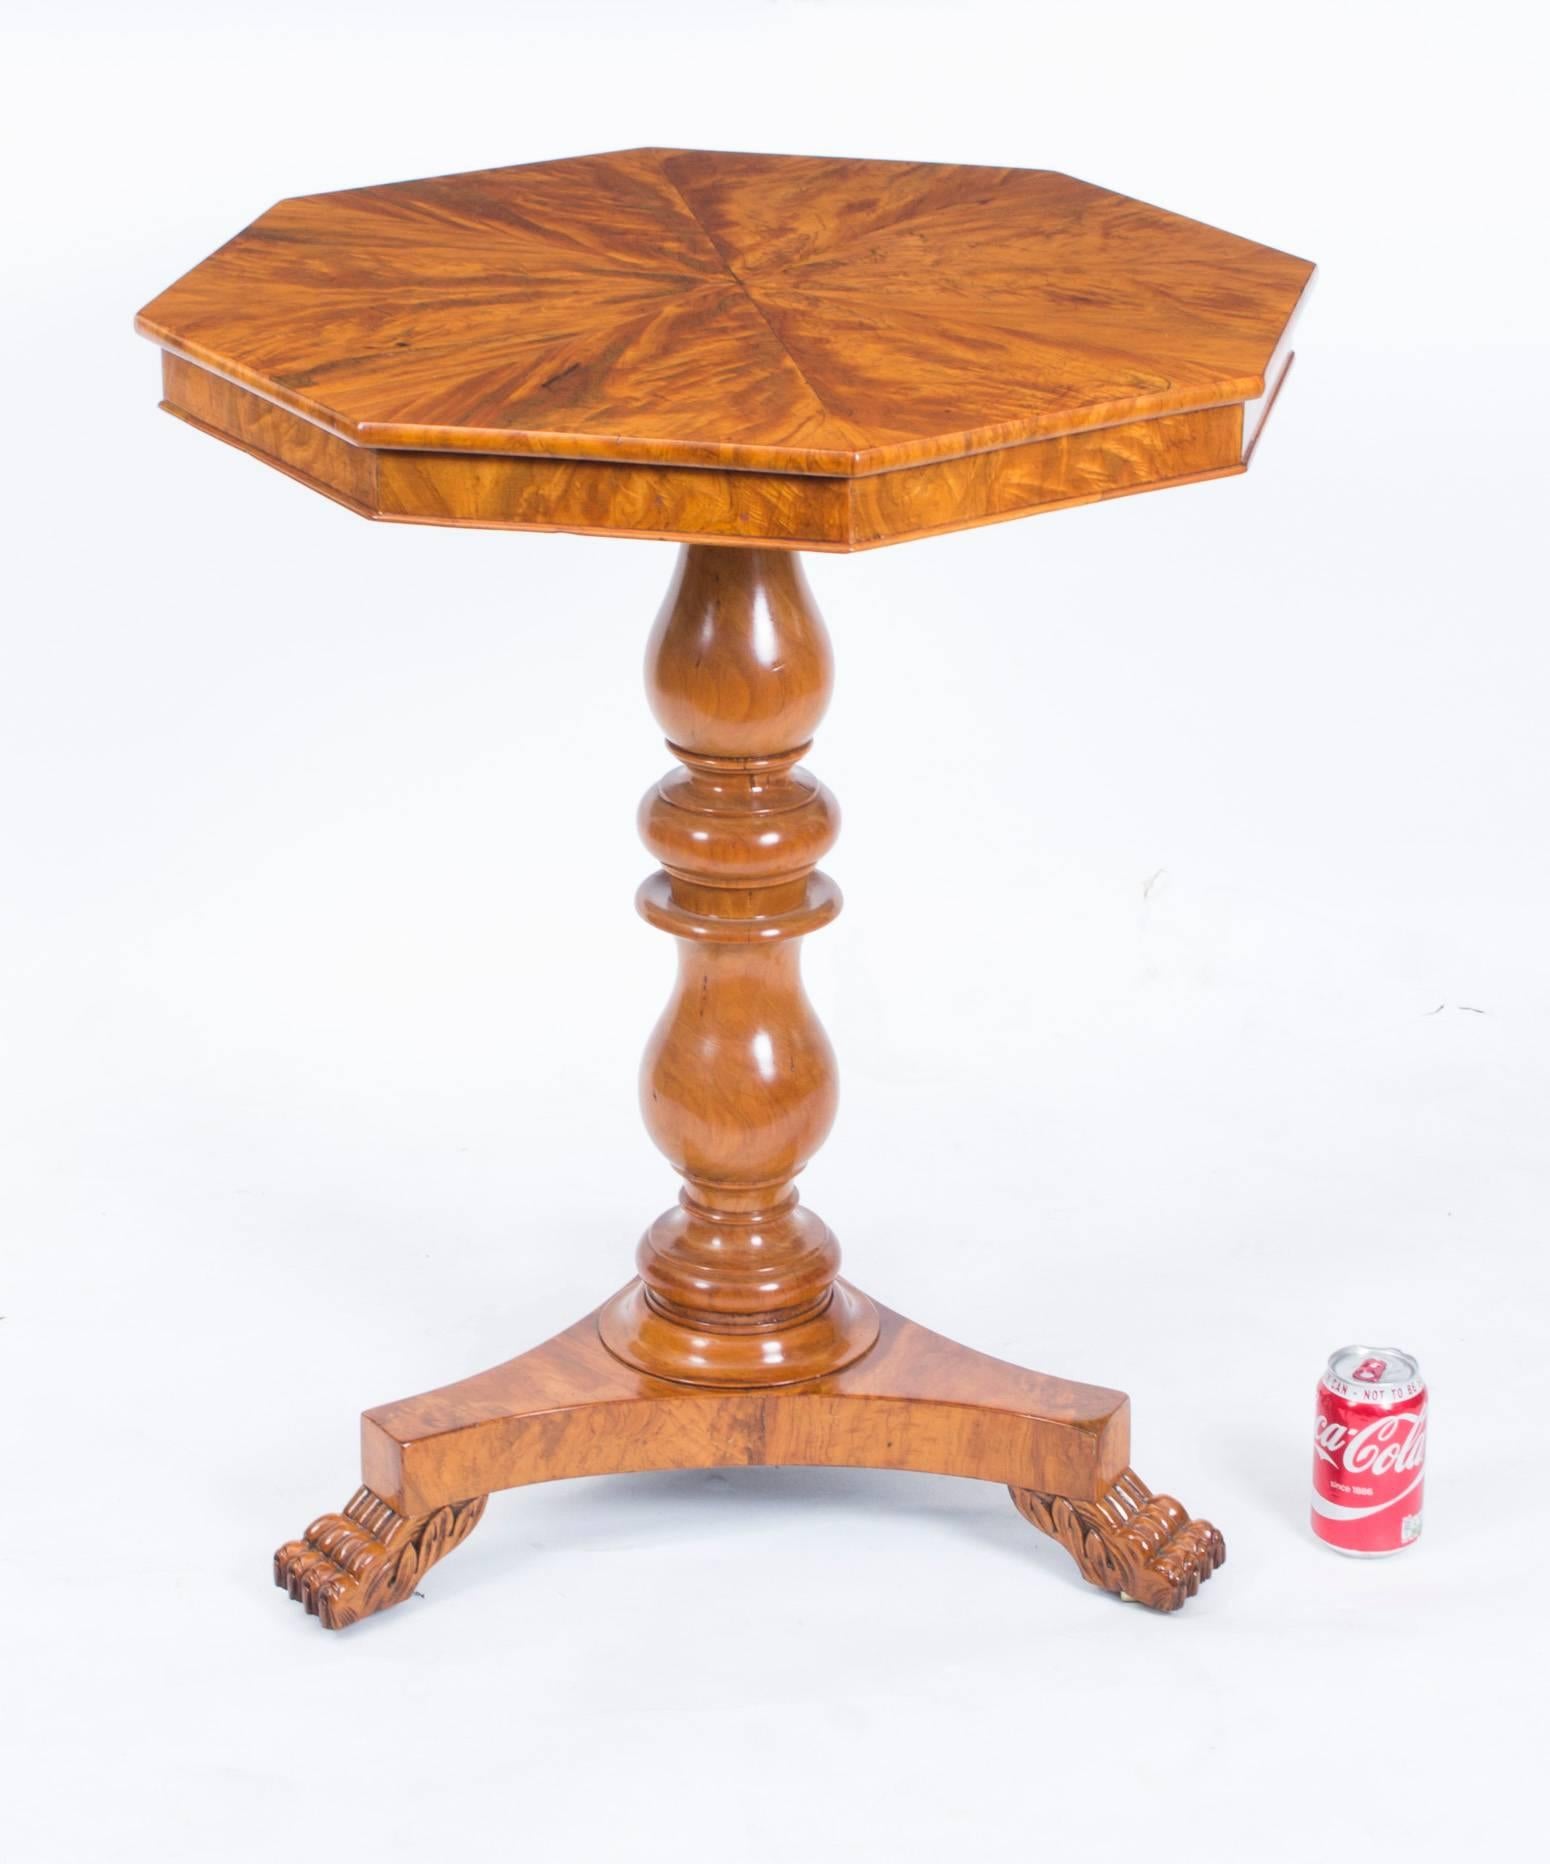 This is a beautiful antique French Louis Philippe octagonal satinwood and fruitwood occasional table, circa 1820 in date. 

The octagonal top has been accomplished using the very best satinwood veneers in a stunning starburst pattern and the stem